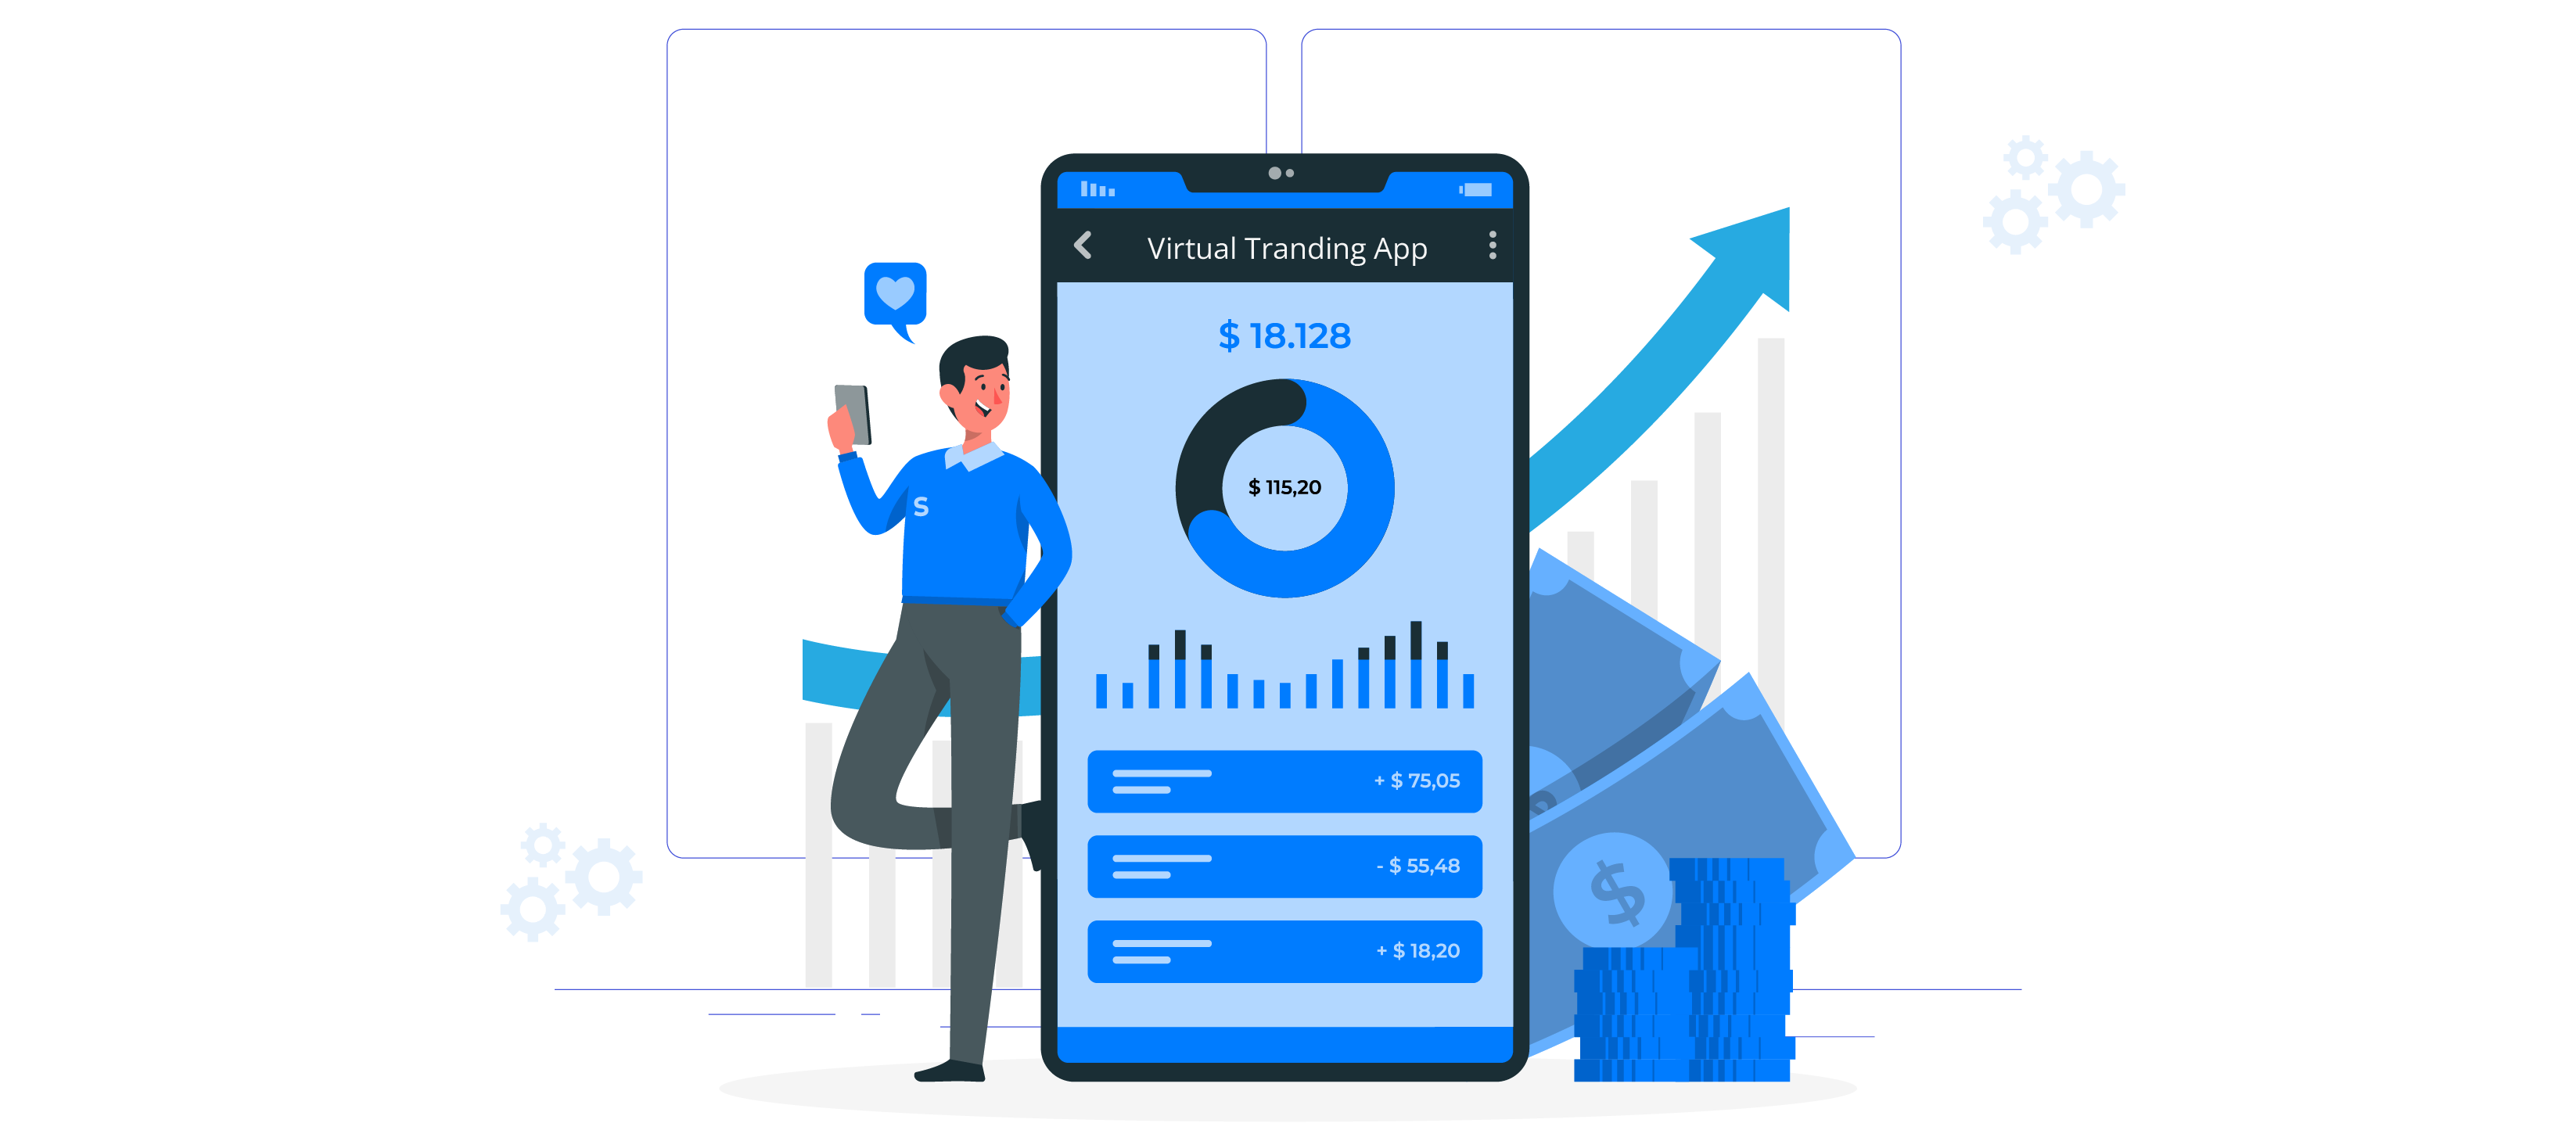 What are virtual Trading